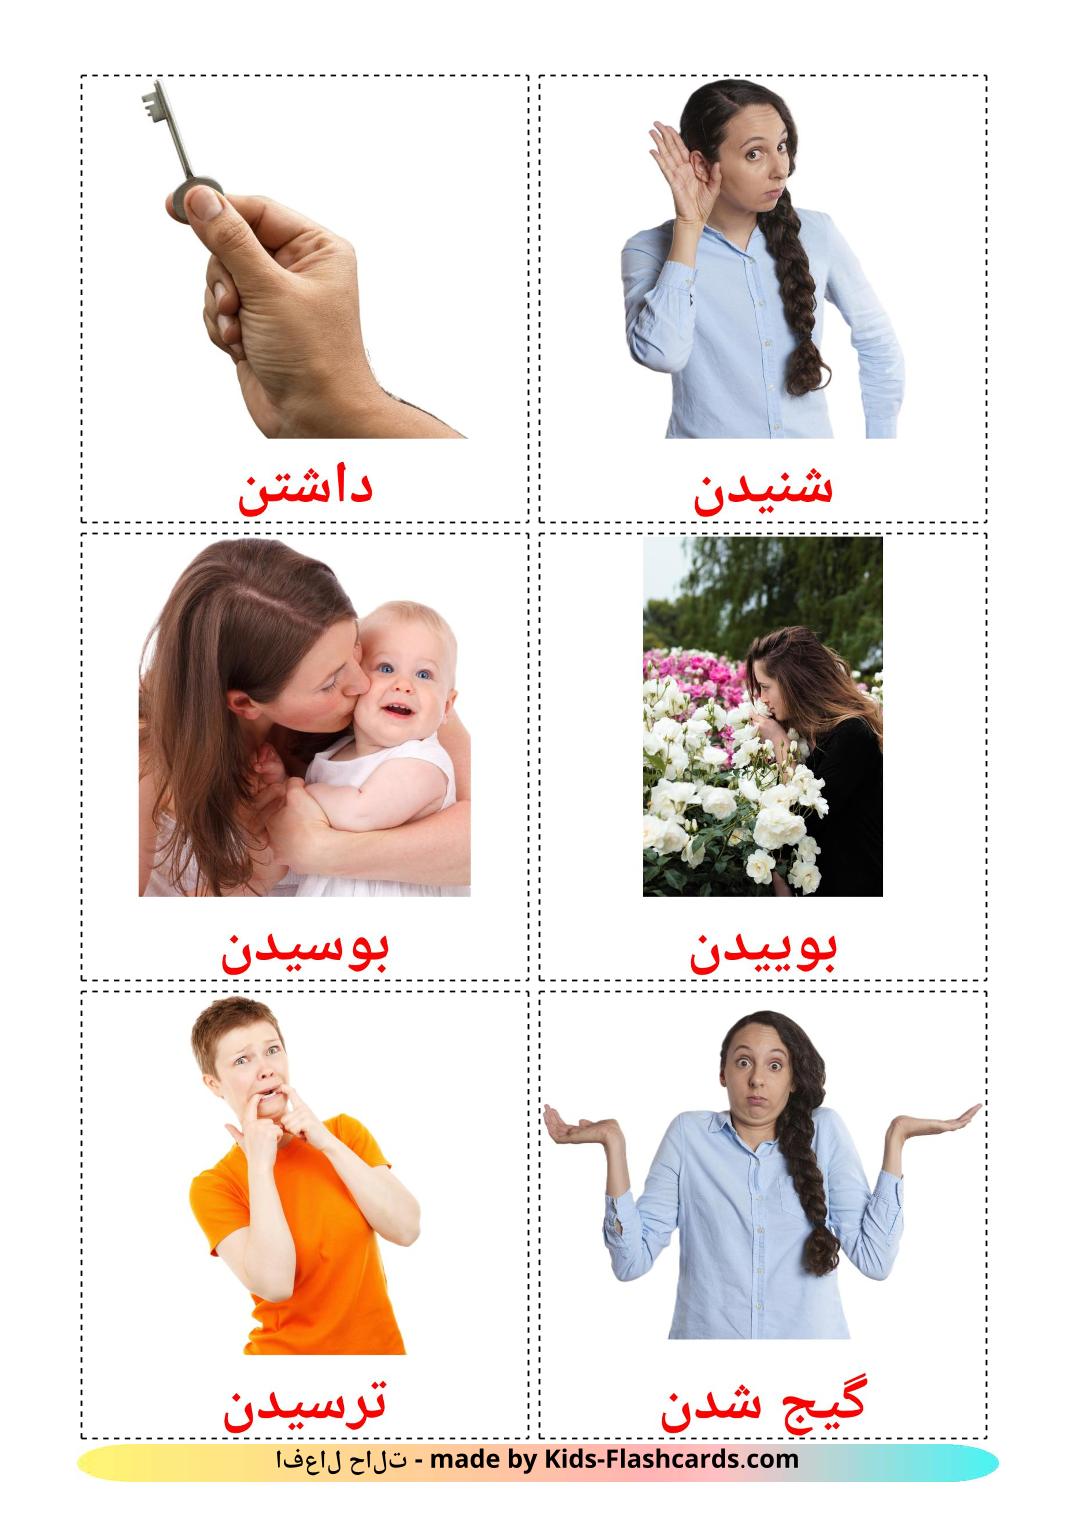 State verbs - 23 Free Printable persian Flashcards 